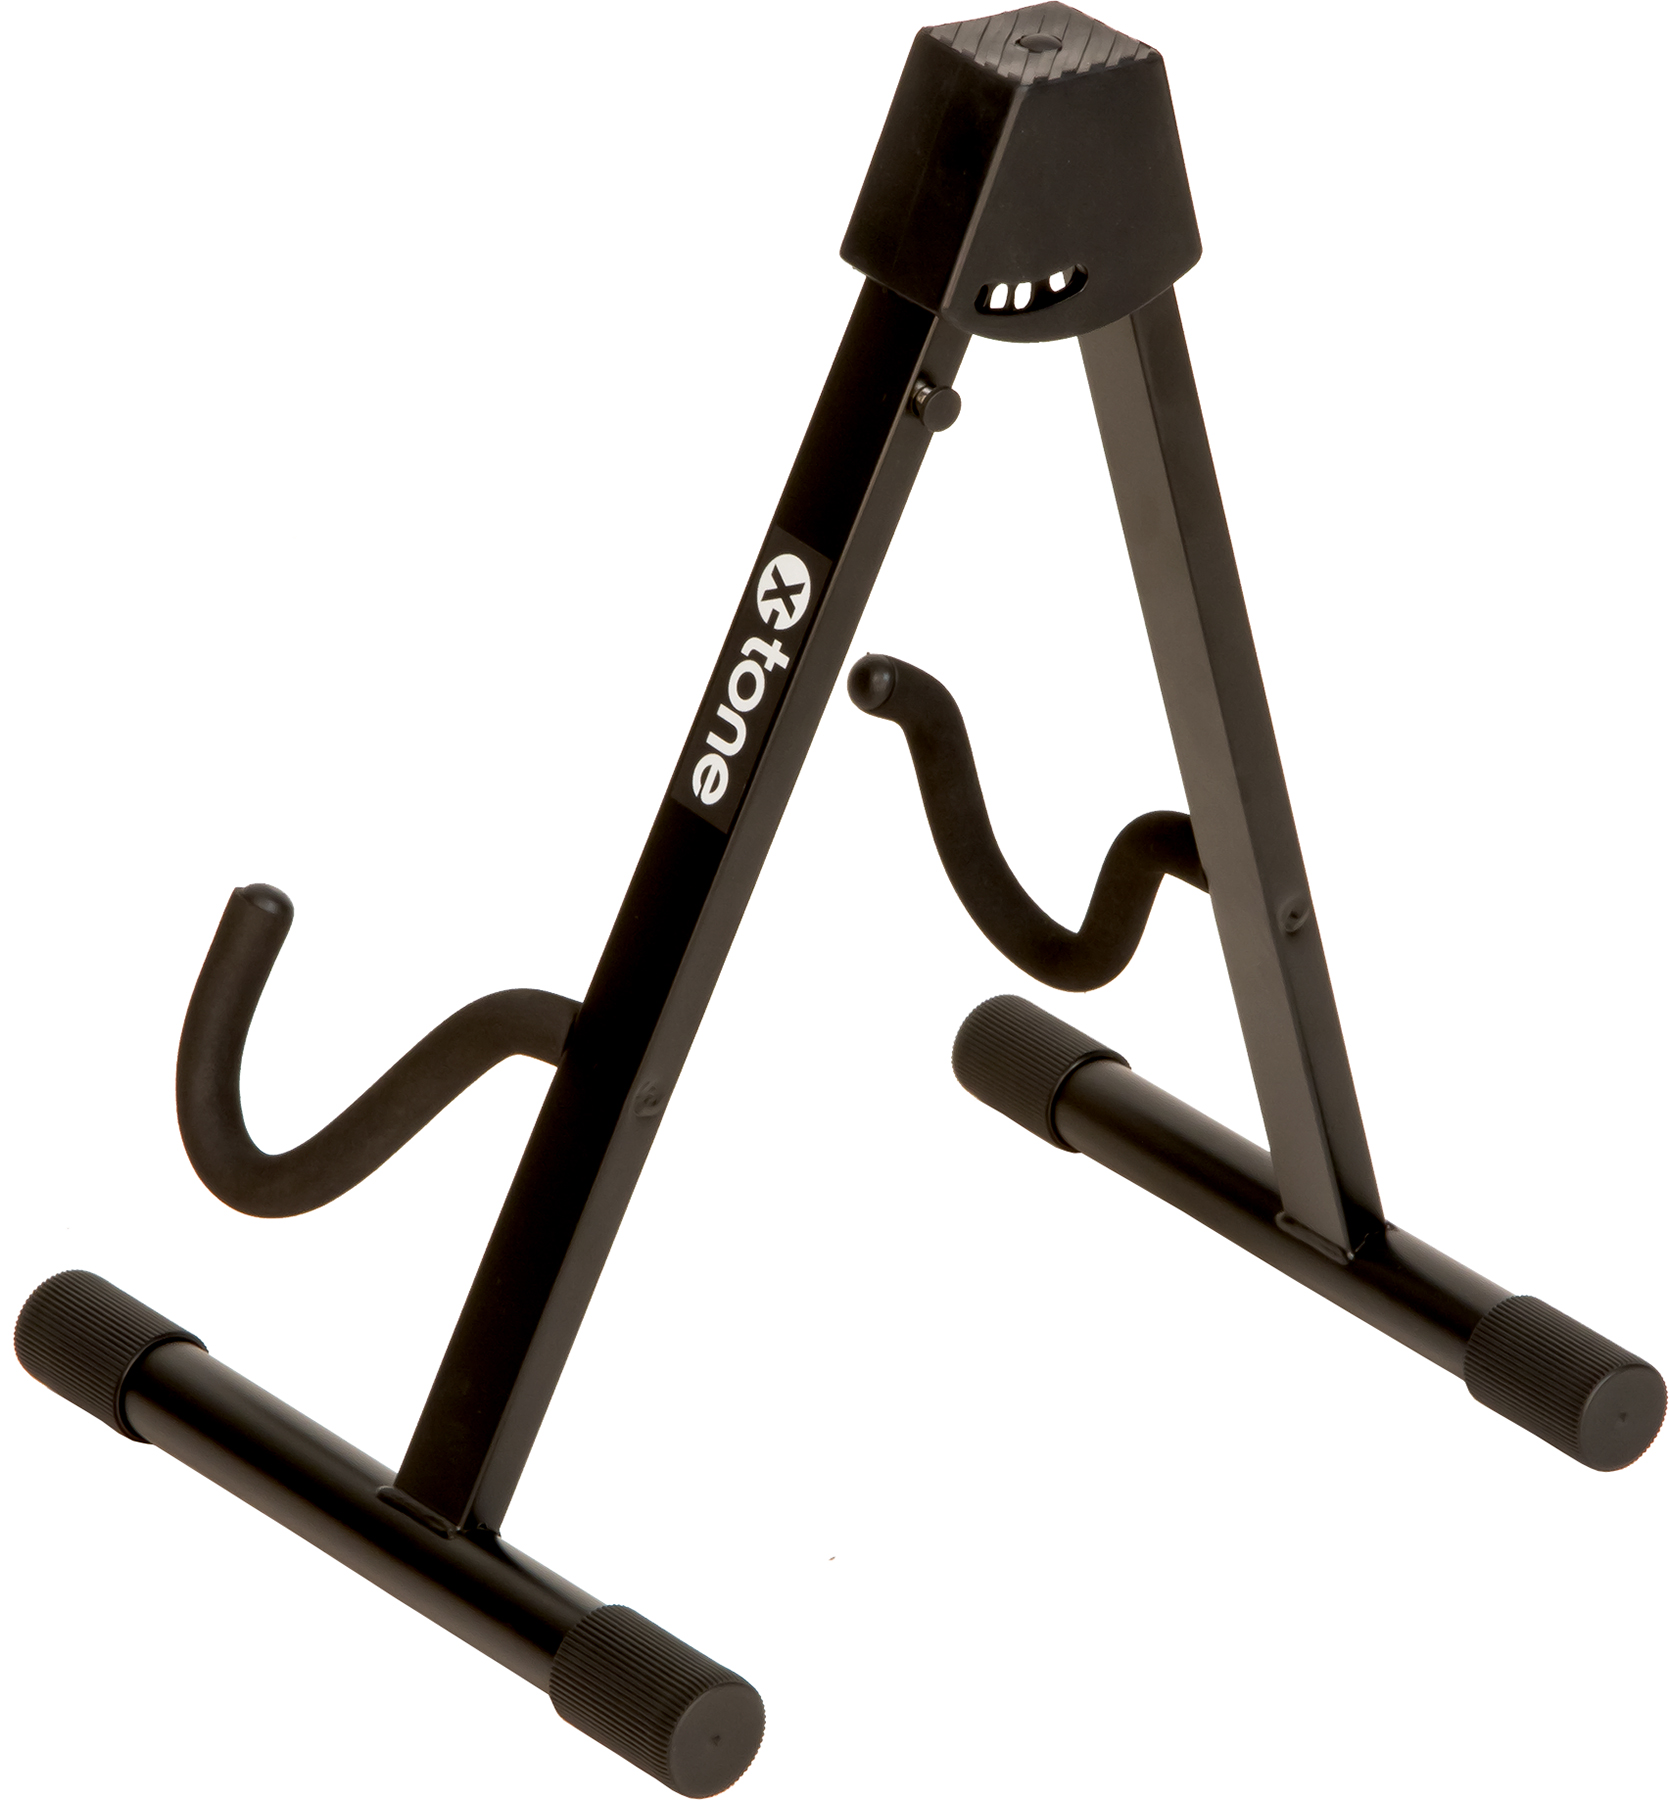 X-tone Xh 6201e Stand Guitare Electrique Sol Pliable - Gitaarstandaard - Variation 1